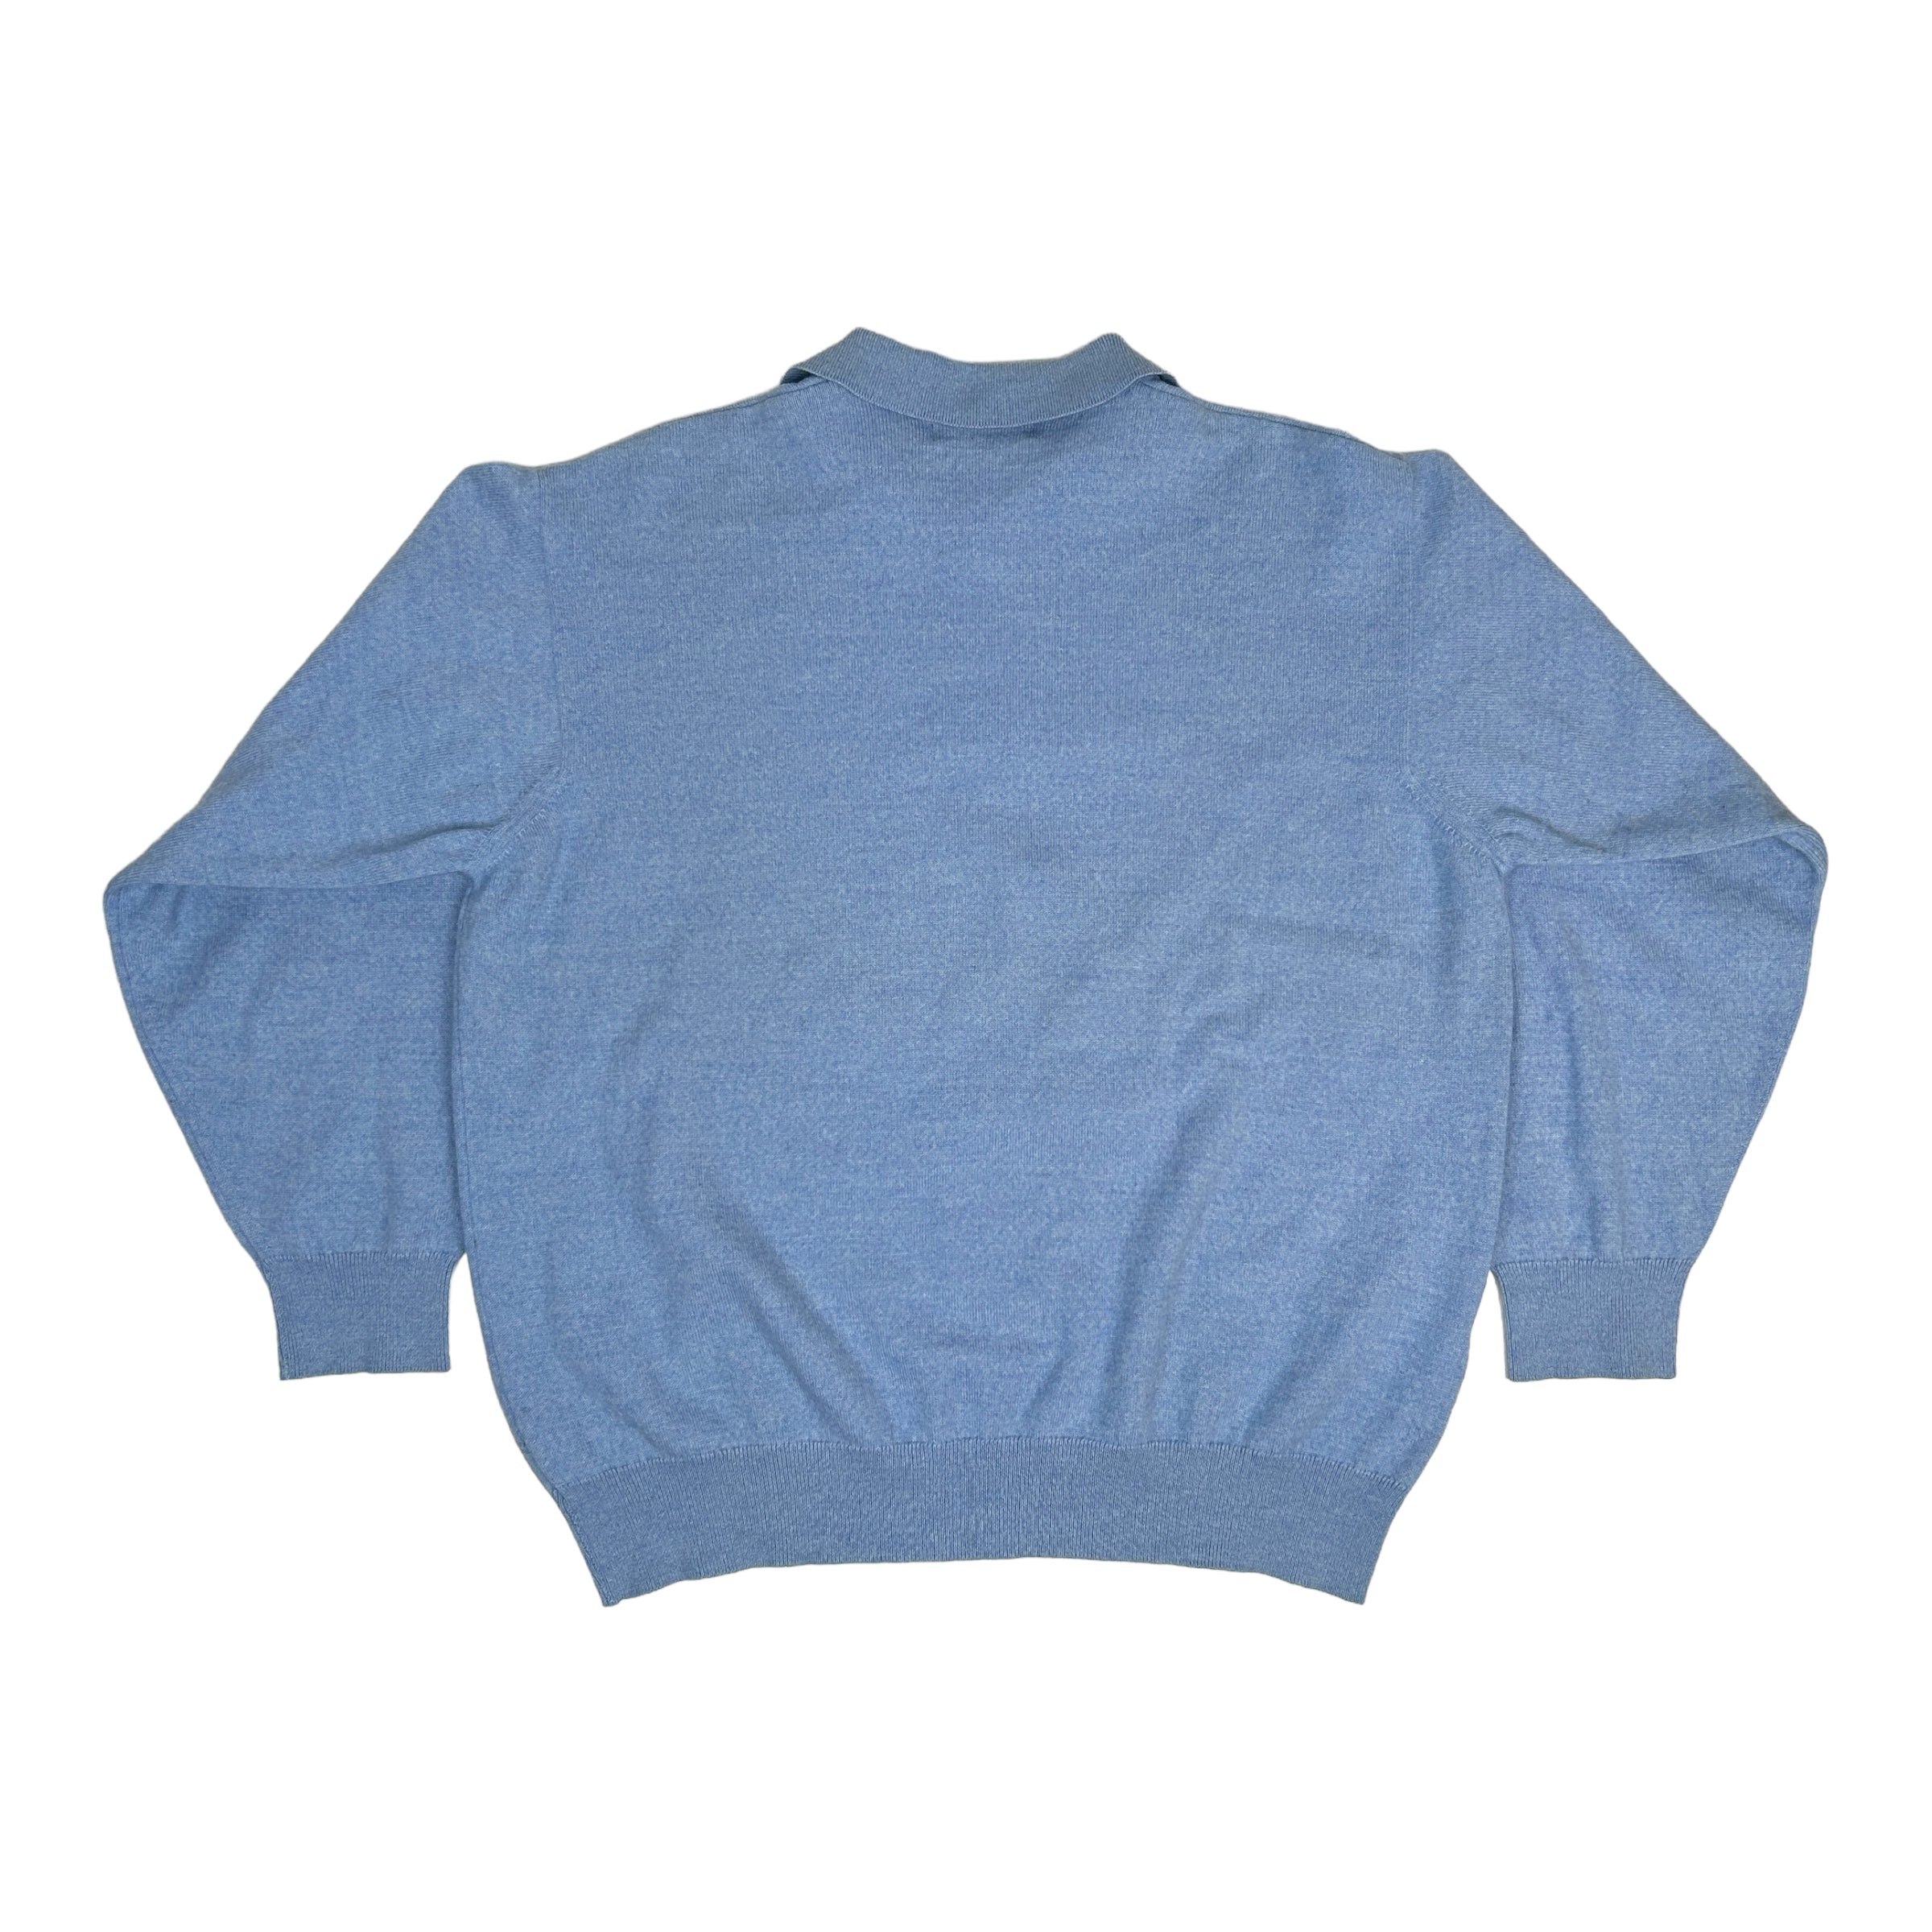 BURBERRY BLUE COLLARED SWEATER